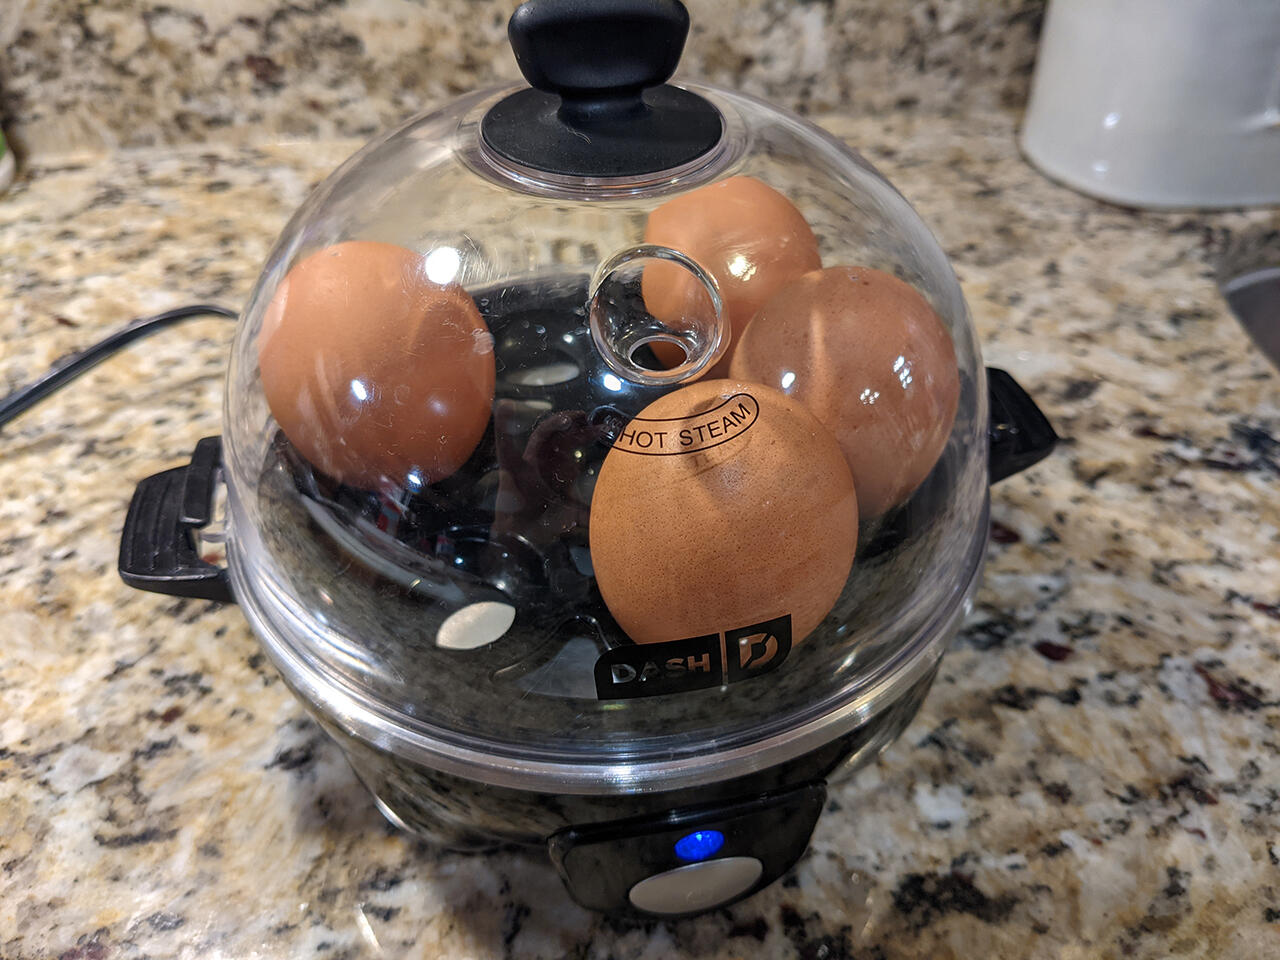 Buy One Of These Silly Egg Cookers